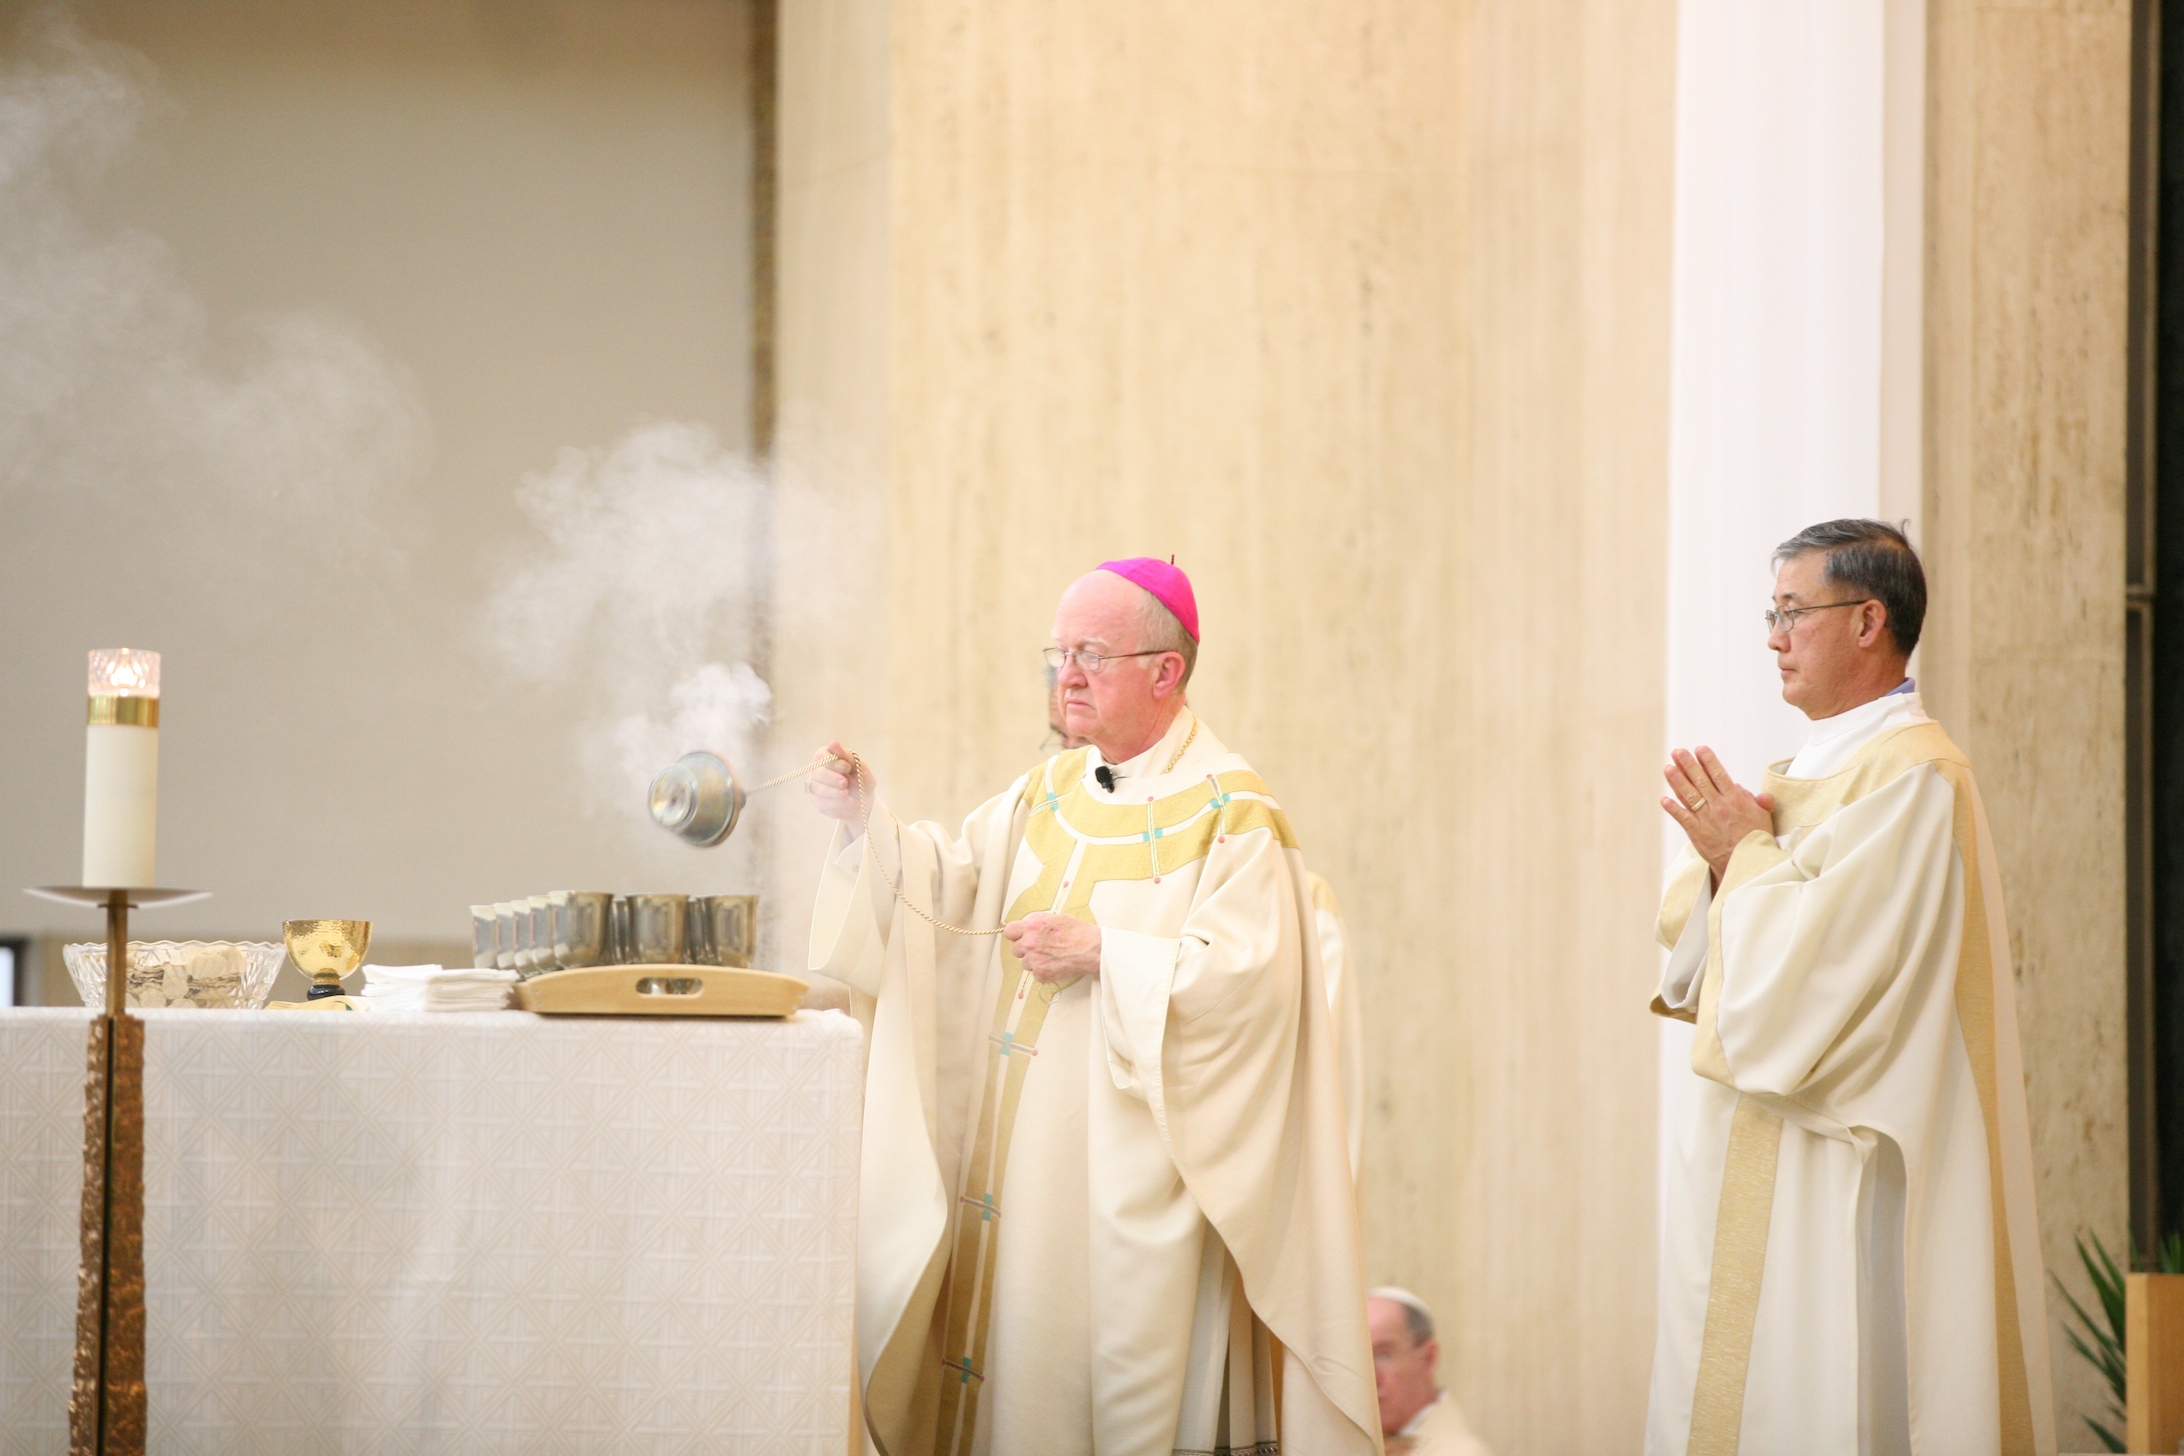 Diocese of Orange Celebrates Blessing of Holy Oils in Annual Chrism Mass